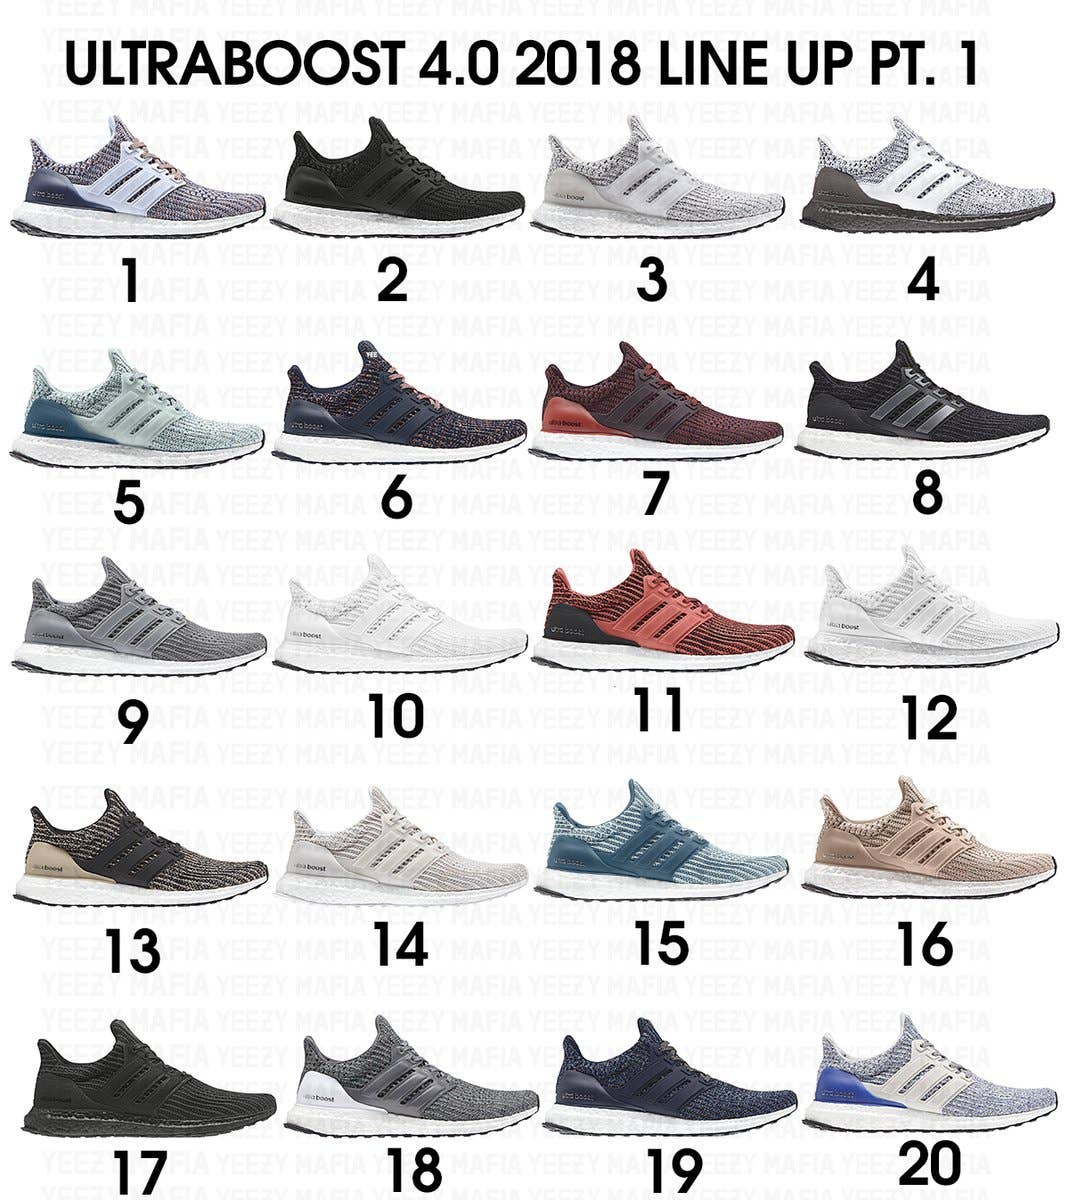 dråbe morbiditet amplifikation Here's a Bunch of Upcoming Adidas Ultra Boosts | Complex